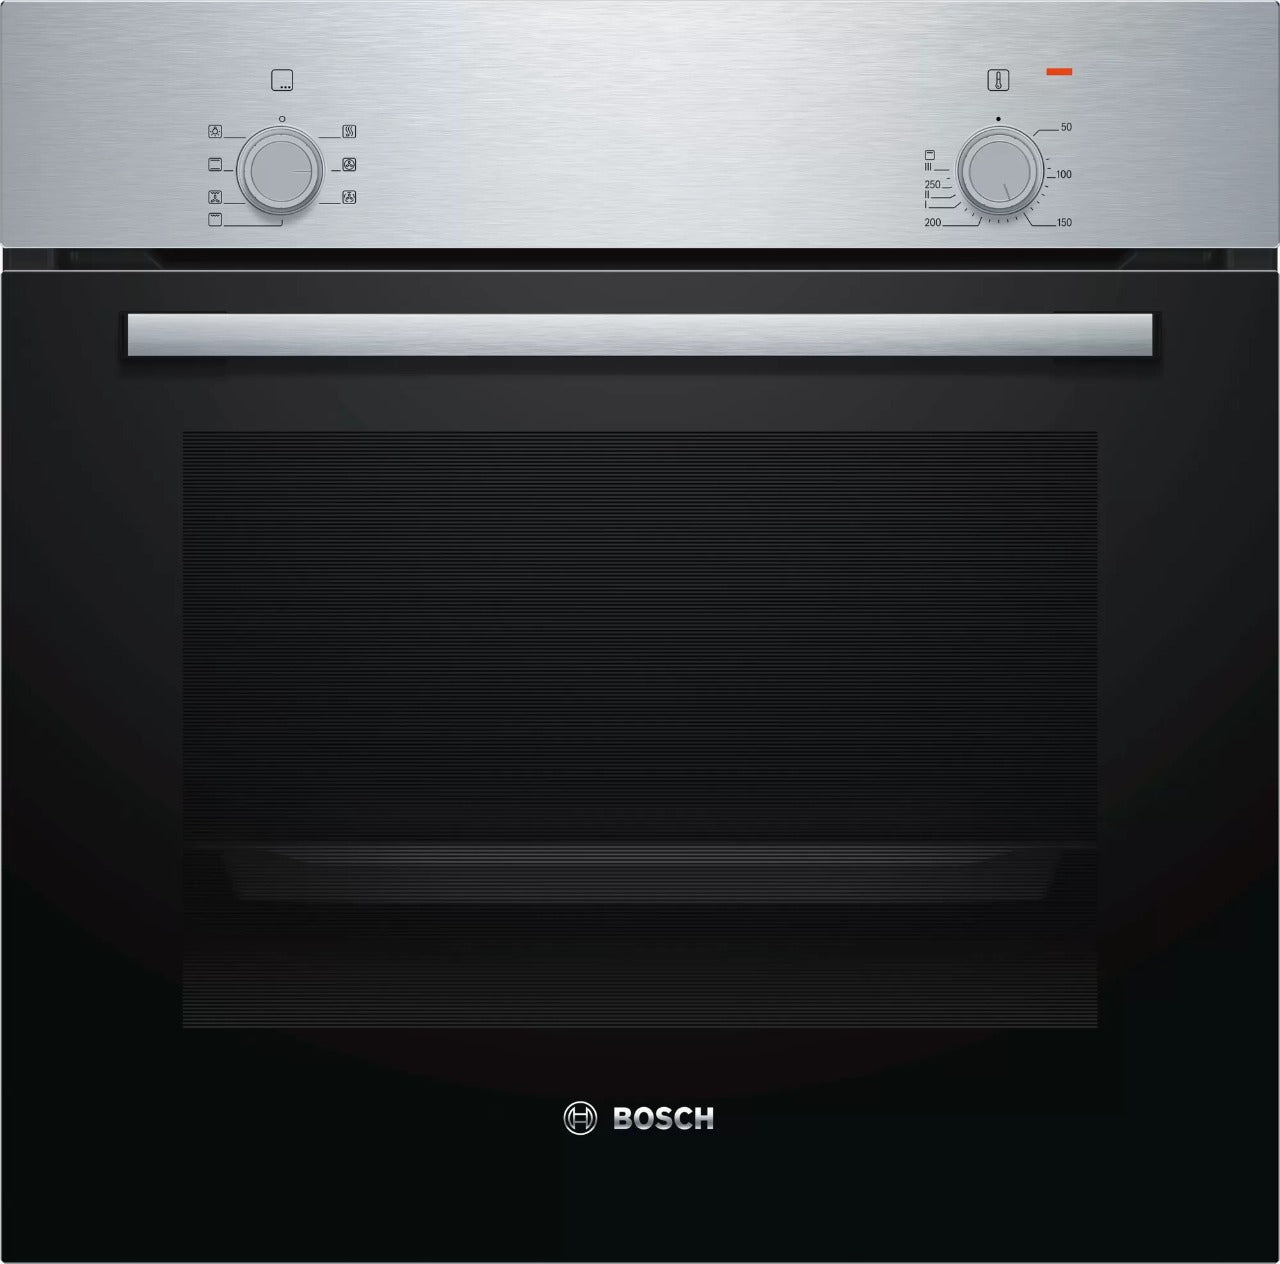 Bosch 2 Built-in oven60 x 60 cm Stainless steel HBF010BR0Z